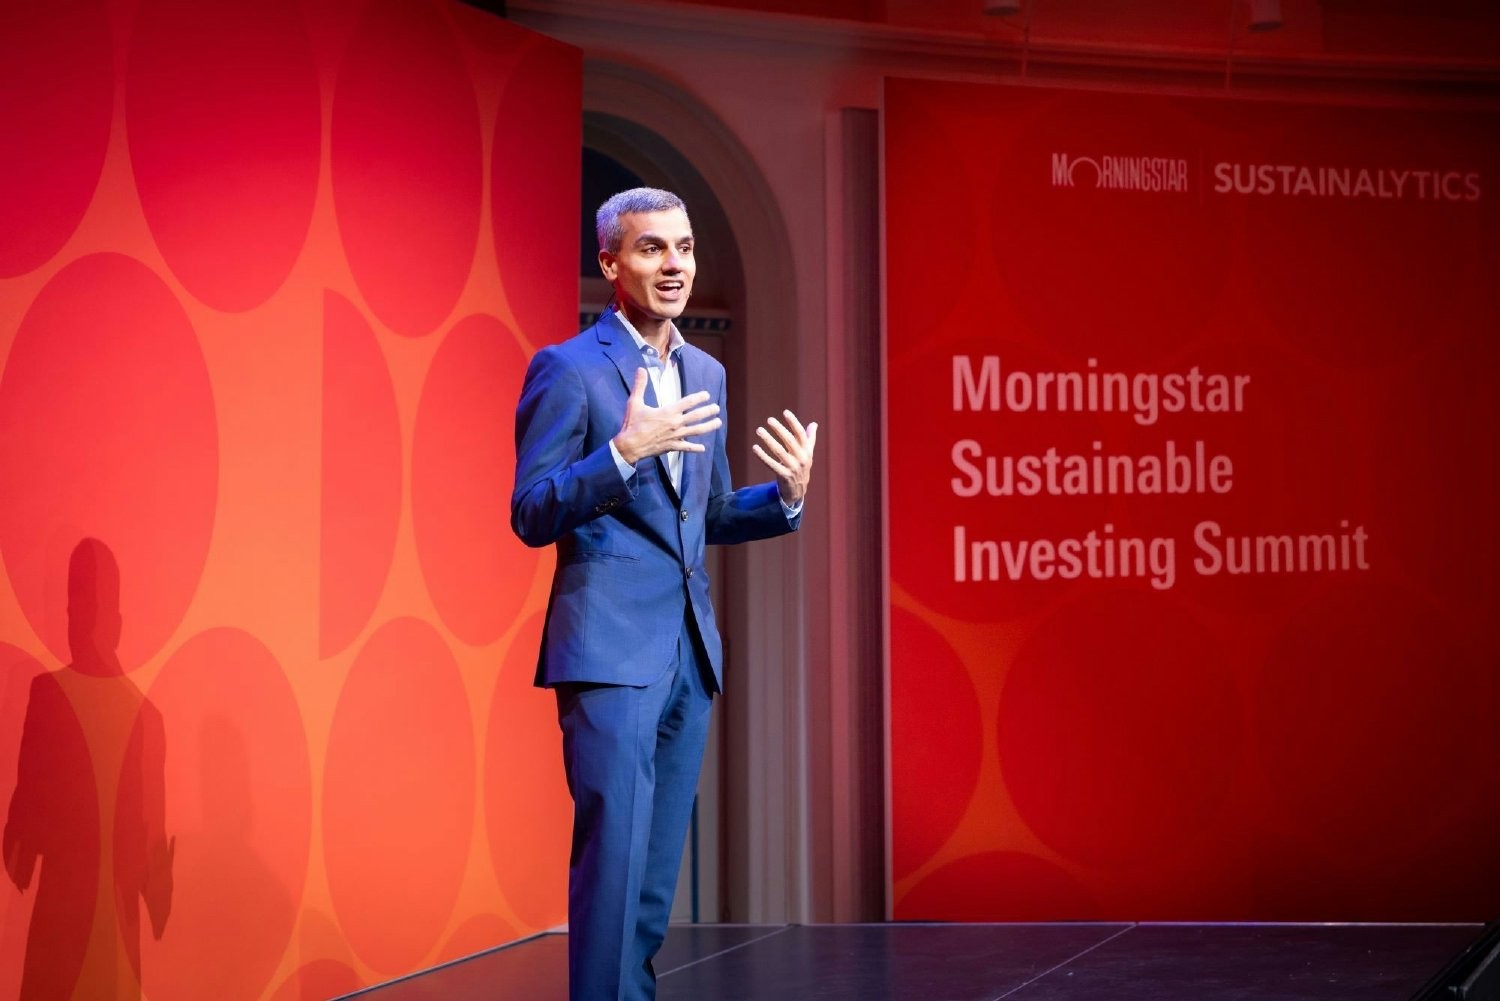 Our CEO Kunal presenting at the Morningstar Sustainable Investing Summit. 